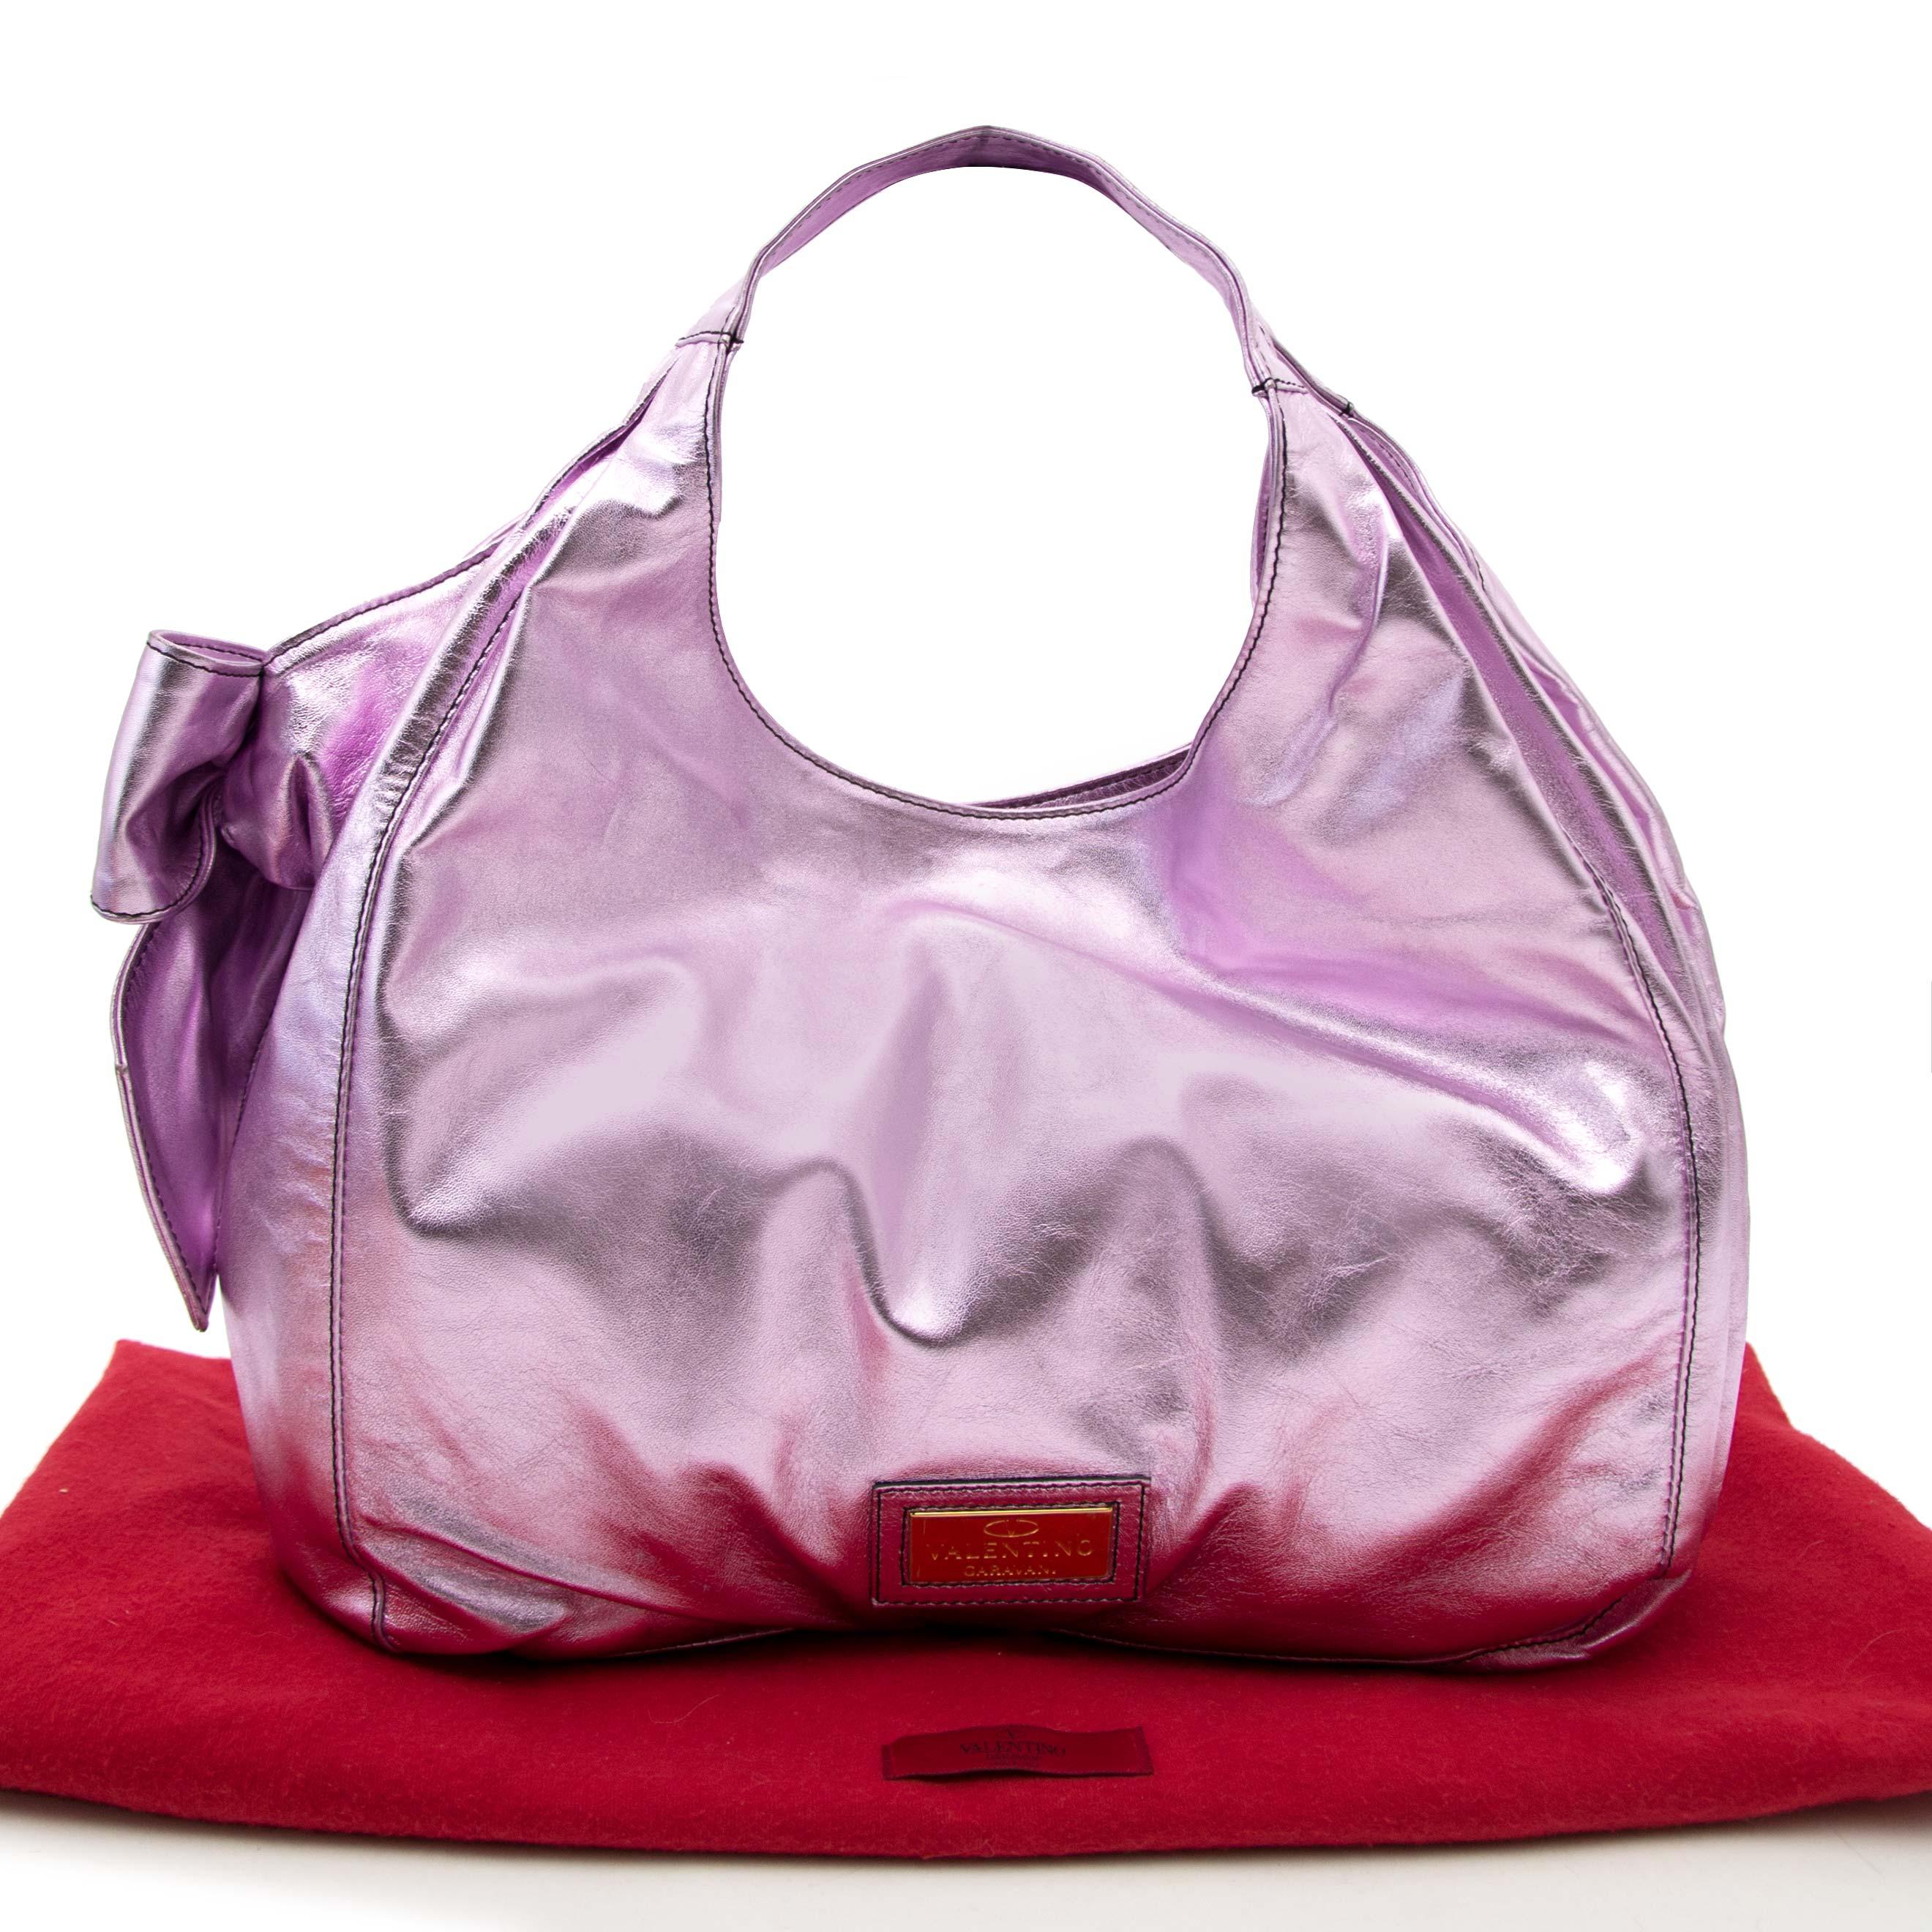 Excellent condition

Valentino Metallic Pink Nuage Bow Tote

Go for a sophisticated yet girly look with this Metallic Pink Nuage bow tote from Valentino. The hobo style bag is crafted from metallic pink nappa leather, that is accented with an